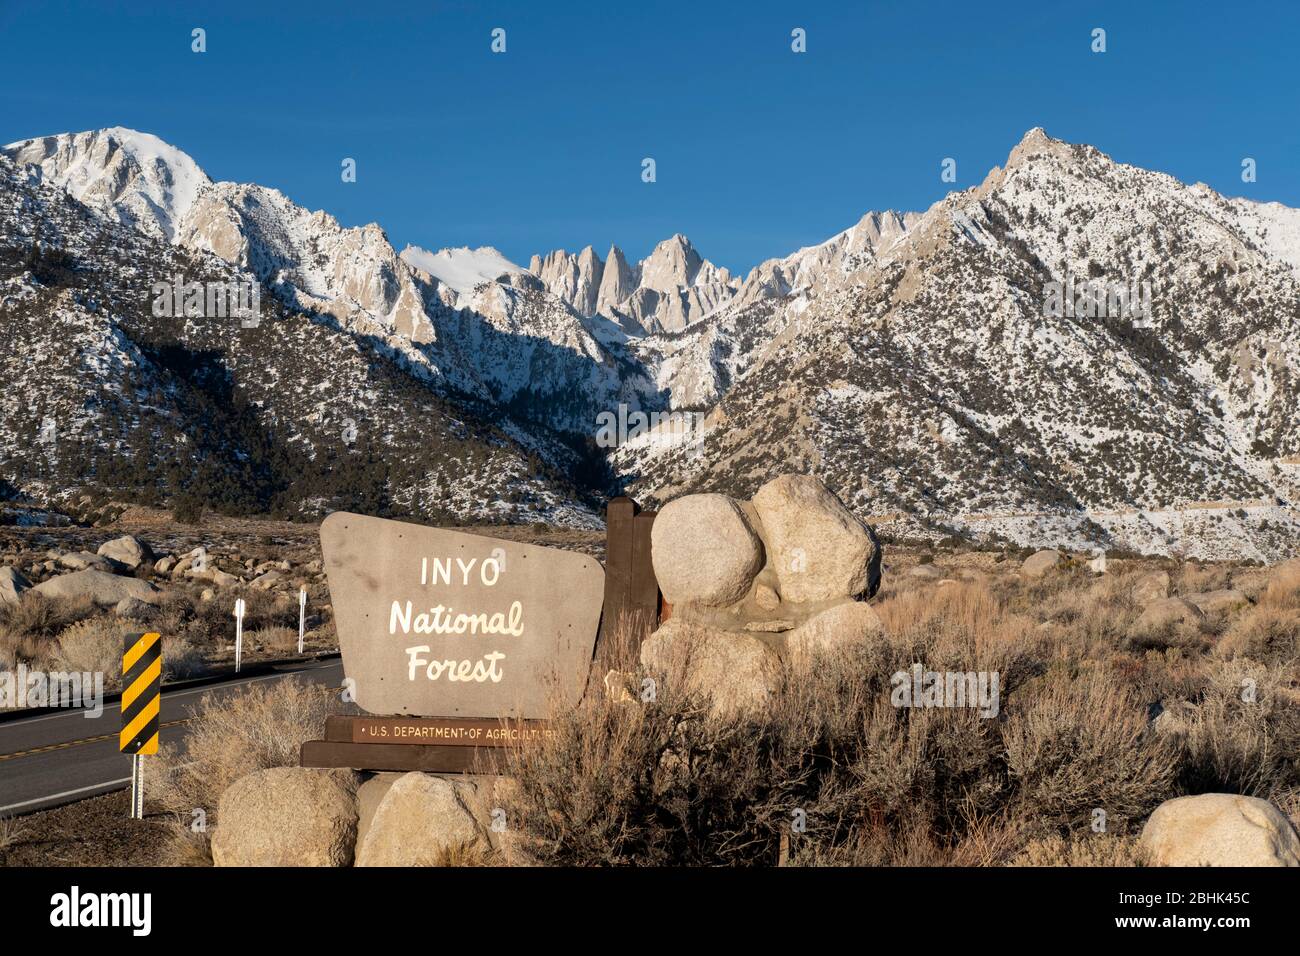 Sign marking the entrance to the Inyo National Forest near Lone Pine approaching Mount Whitney, California Stock Photo